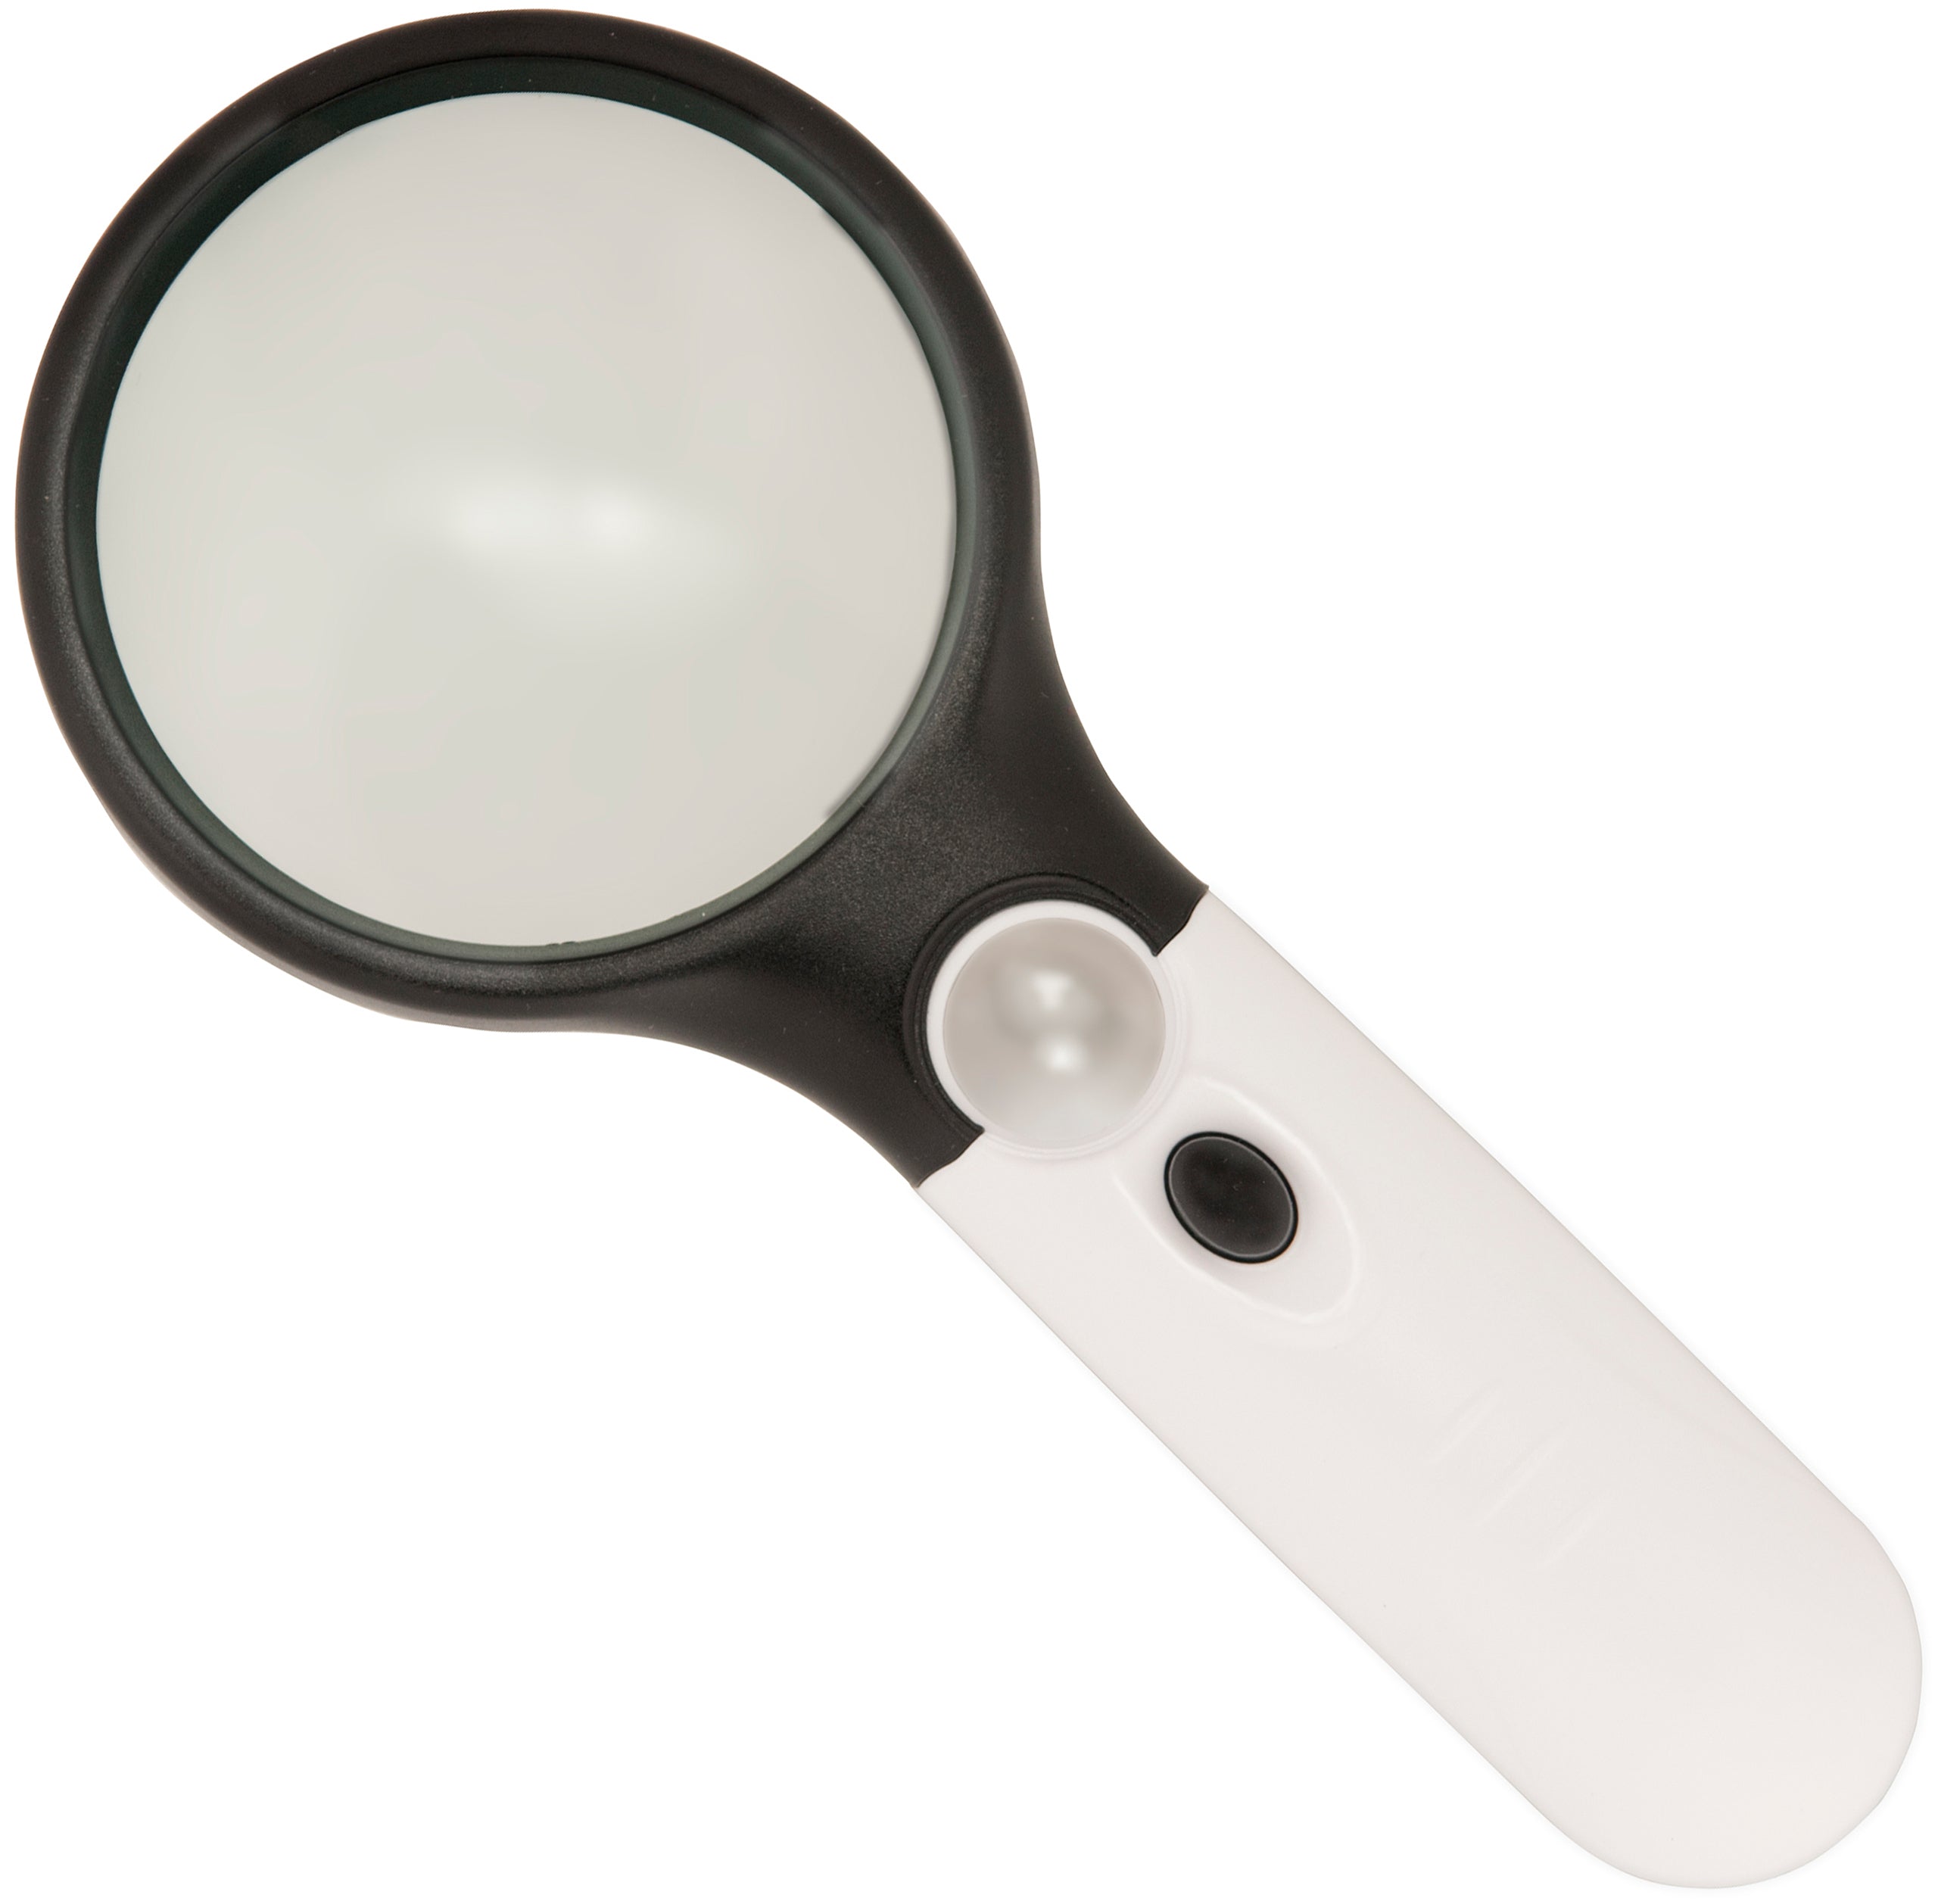 3X LED Page Reading Magnifier with 3 Built-In LED Lights